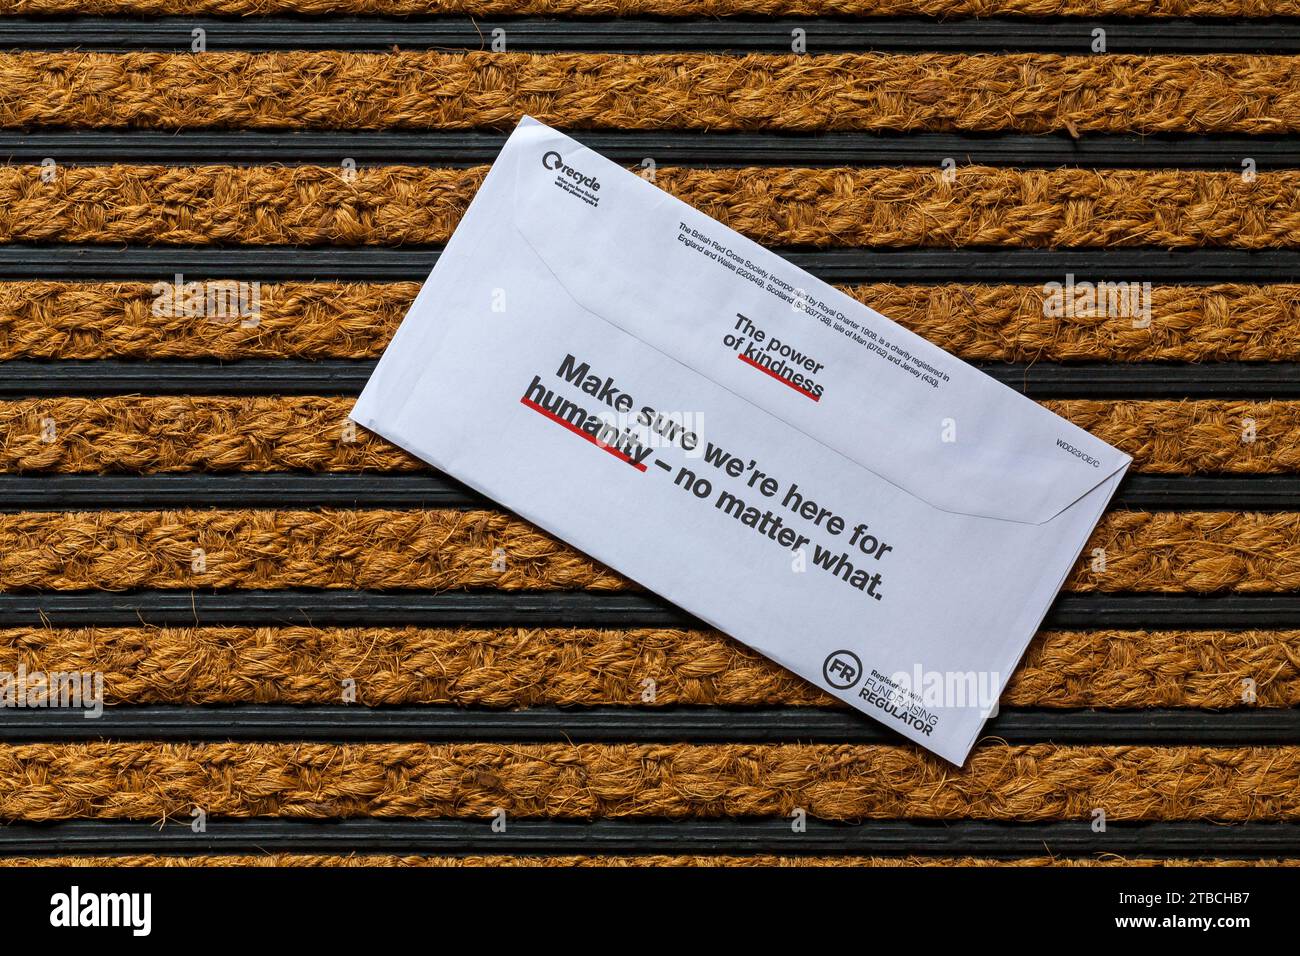 Post on door mat - charity appeal, Christmas appeal from British Red Cross back of envelope the power of kindness Stock Photo